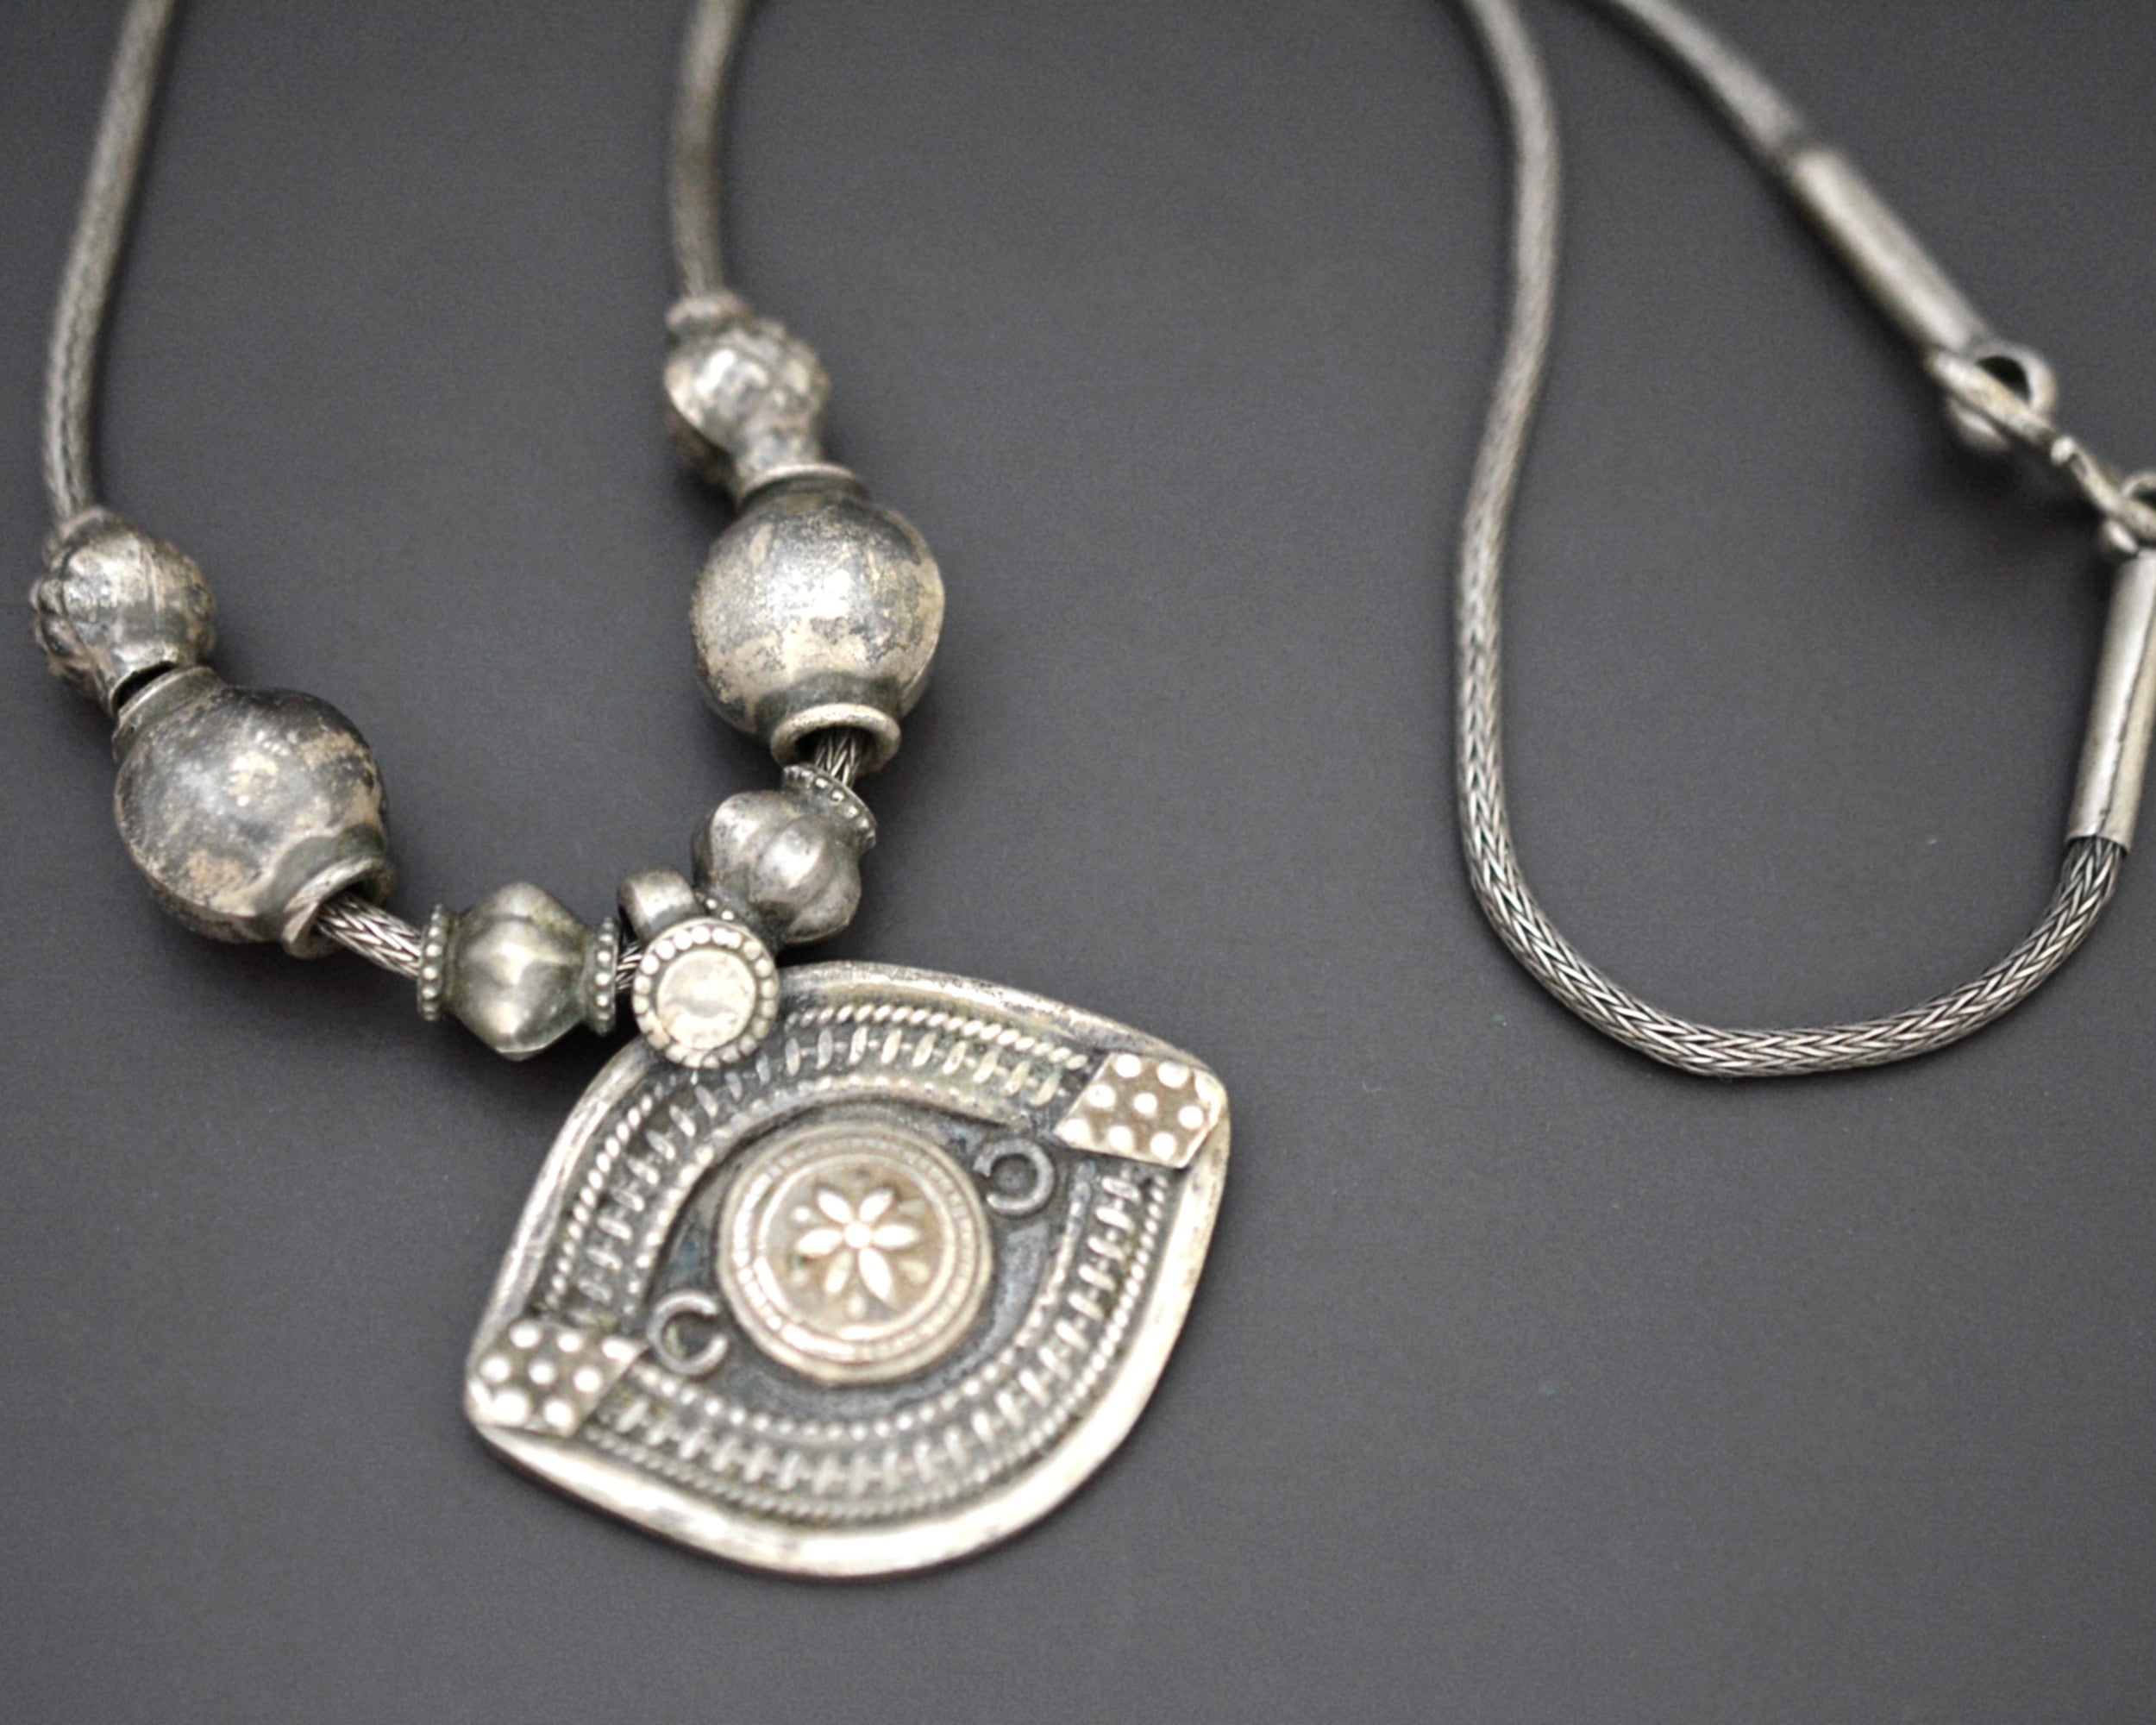 Reserved for A. - Indian Amulet Silver Beads Necklace with Snake Chain